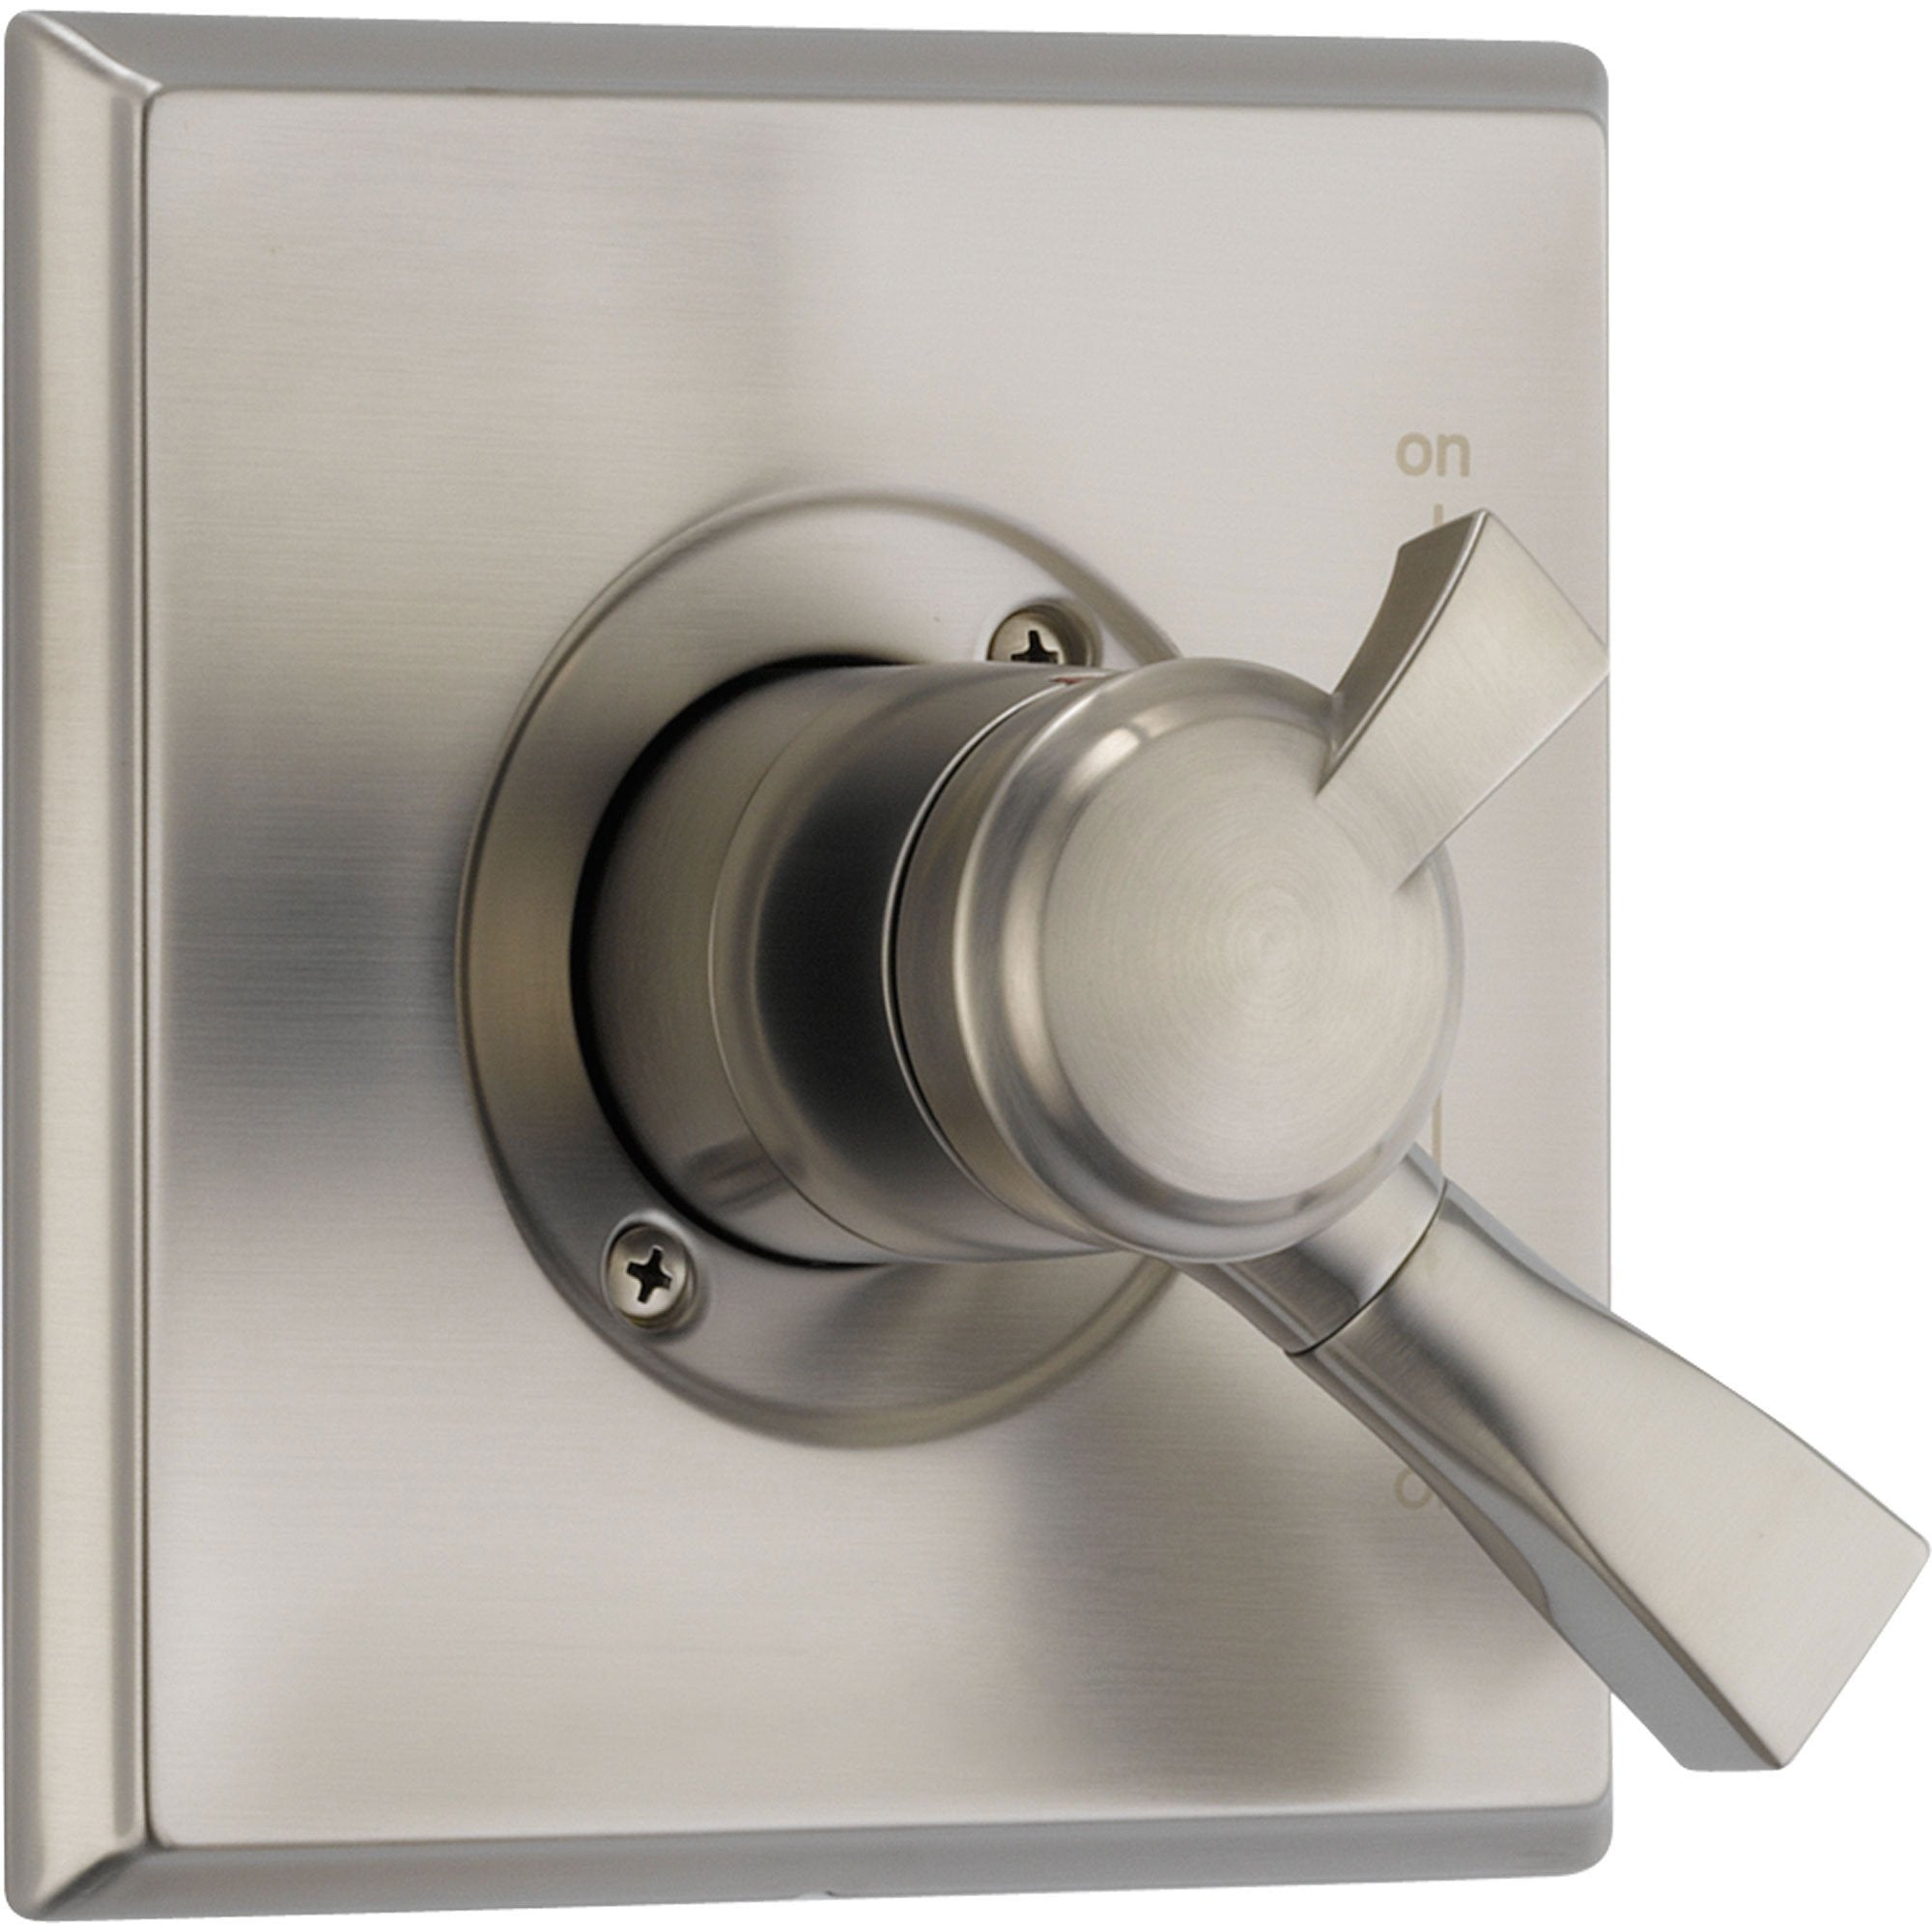 Delta Temperature and Volume Control Stainless Steel Finish Shower w/Valve D082V